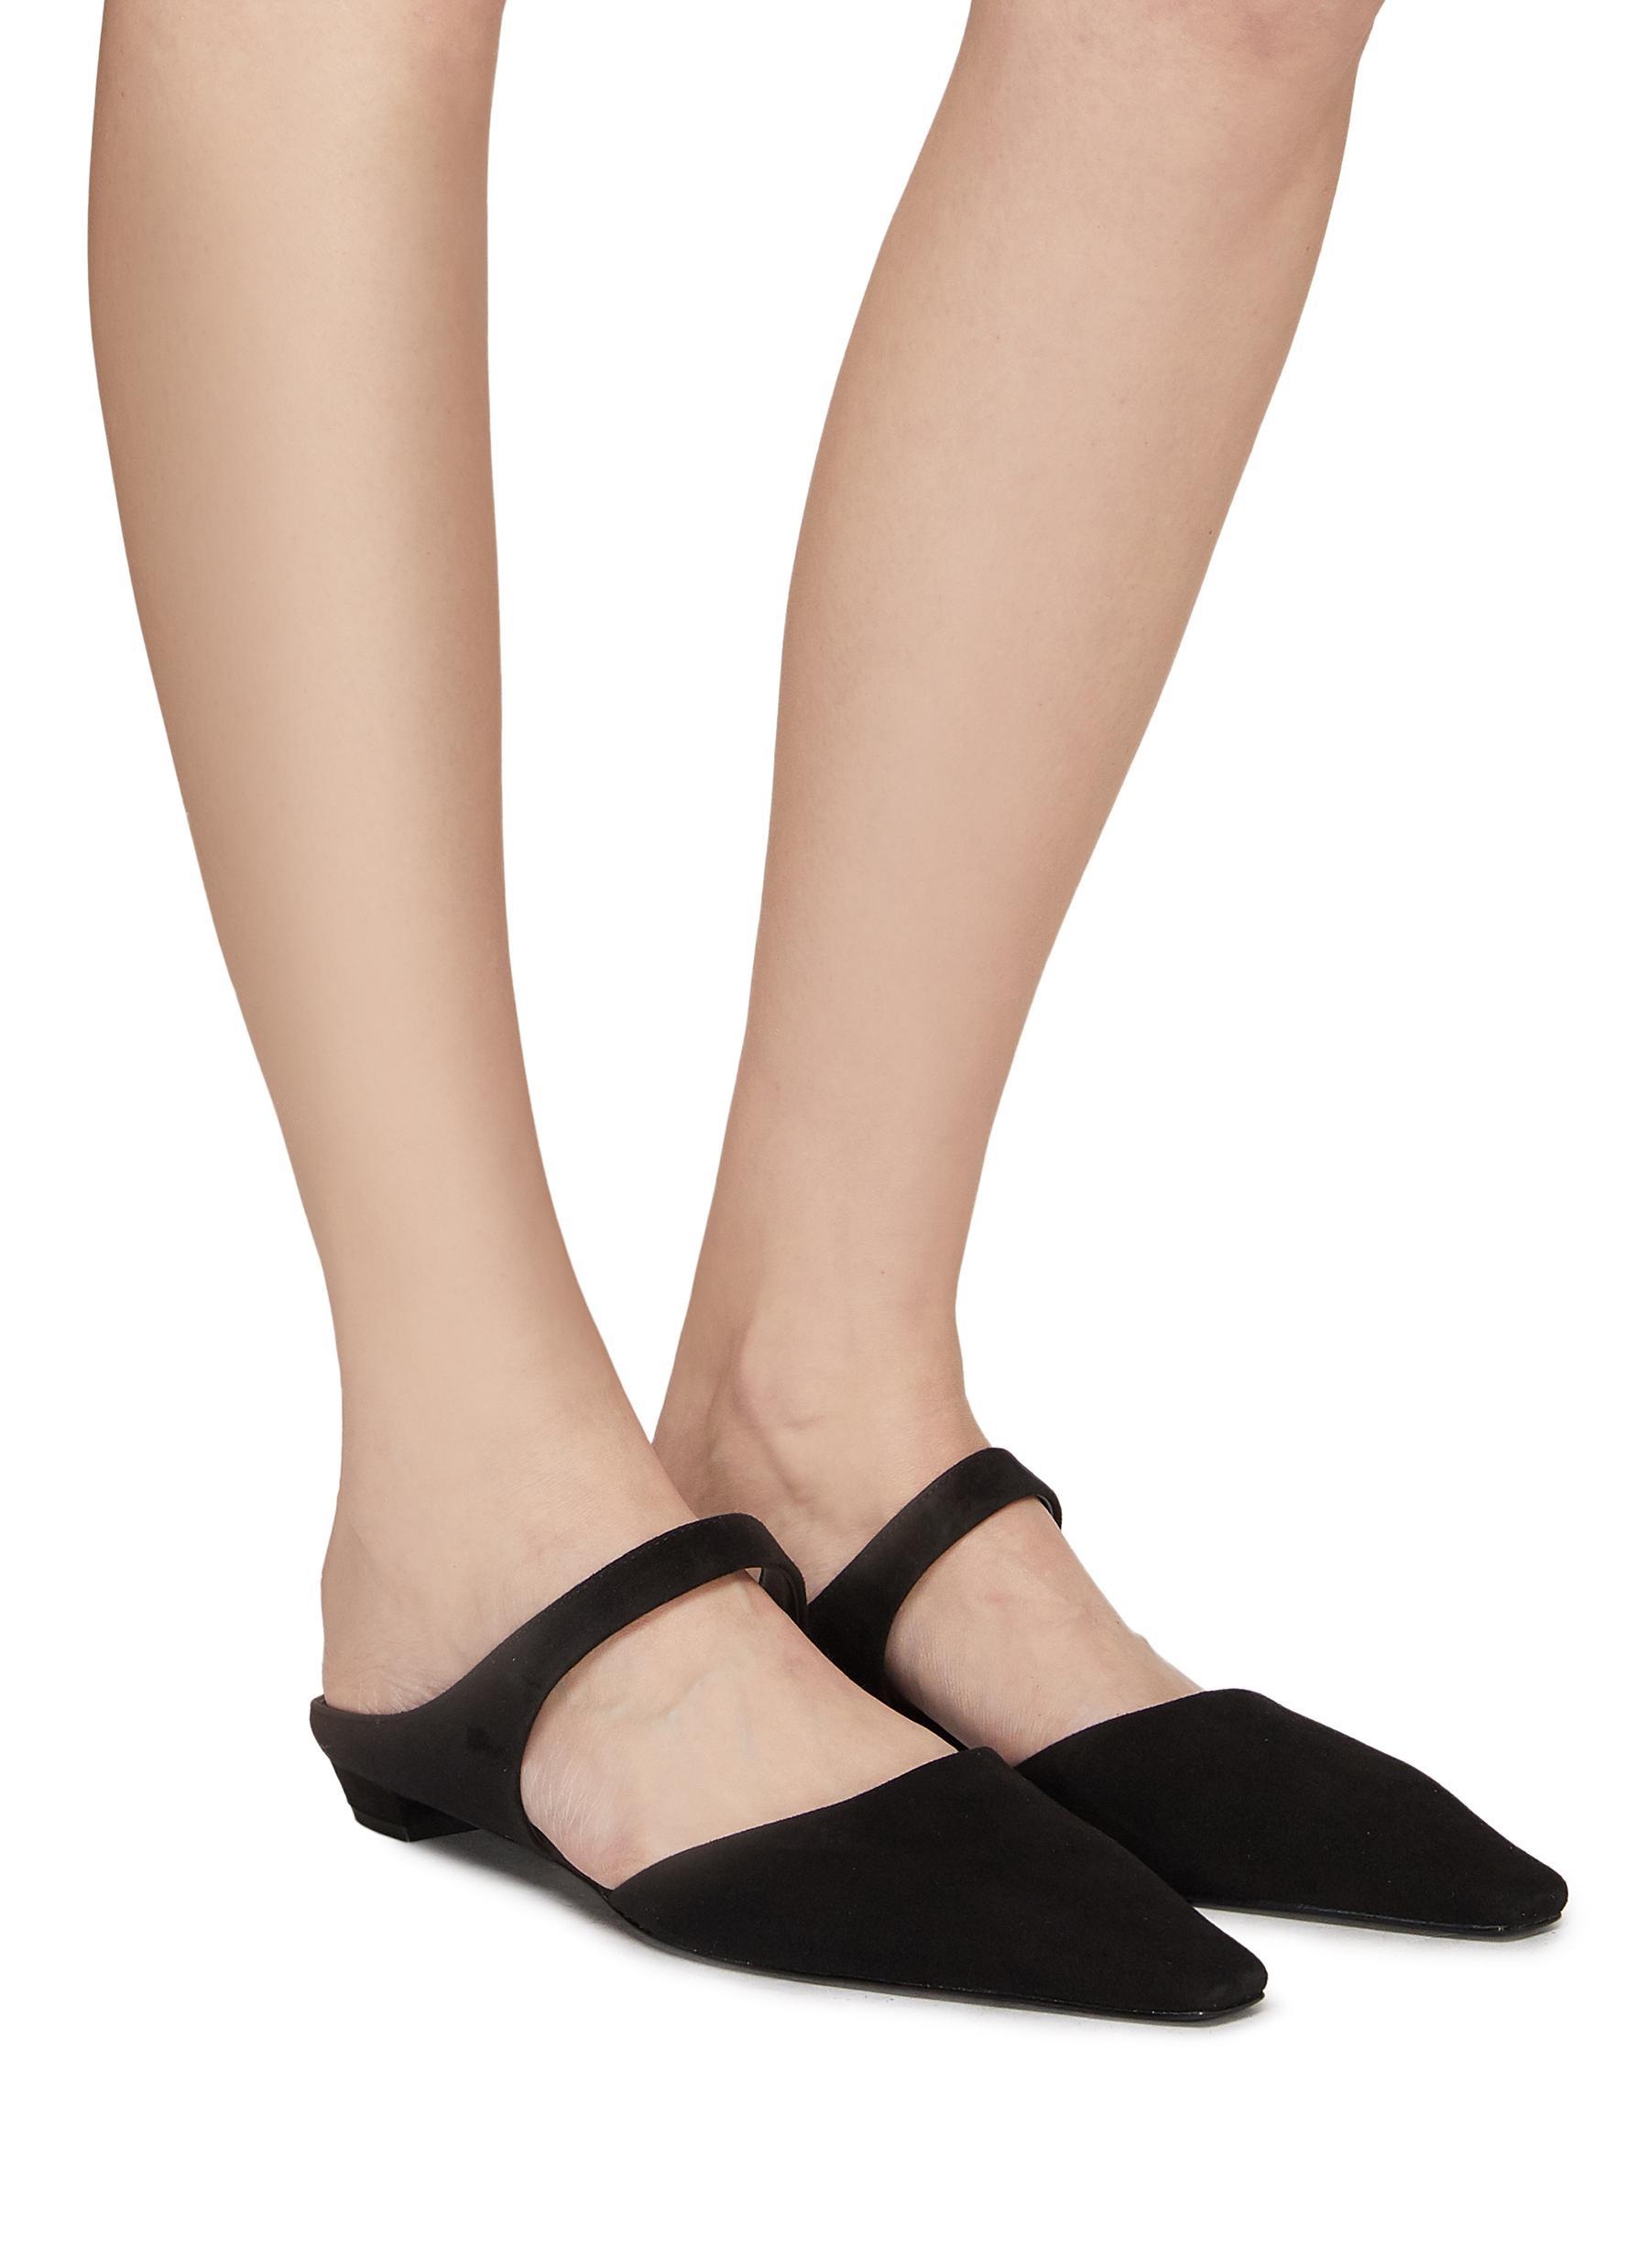 TOTEME The T-strap point-toe faille pumps